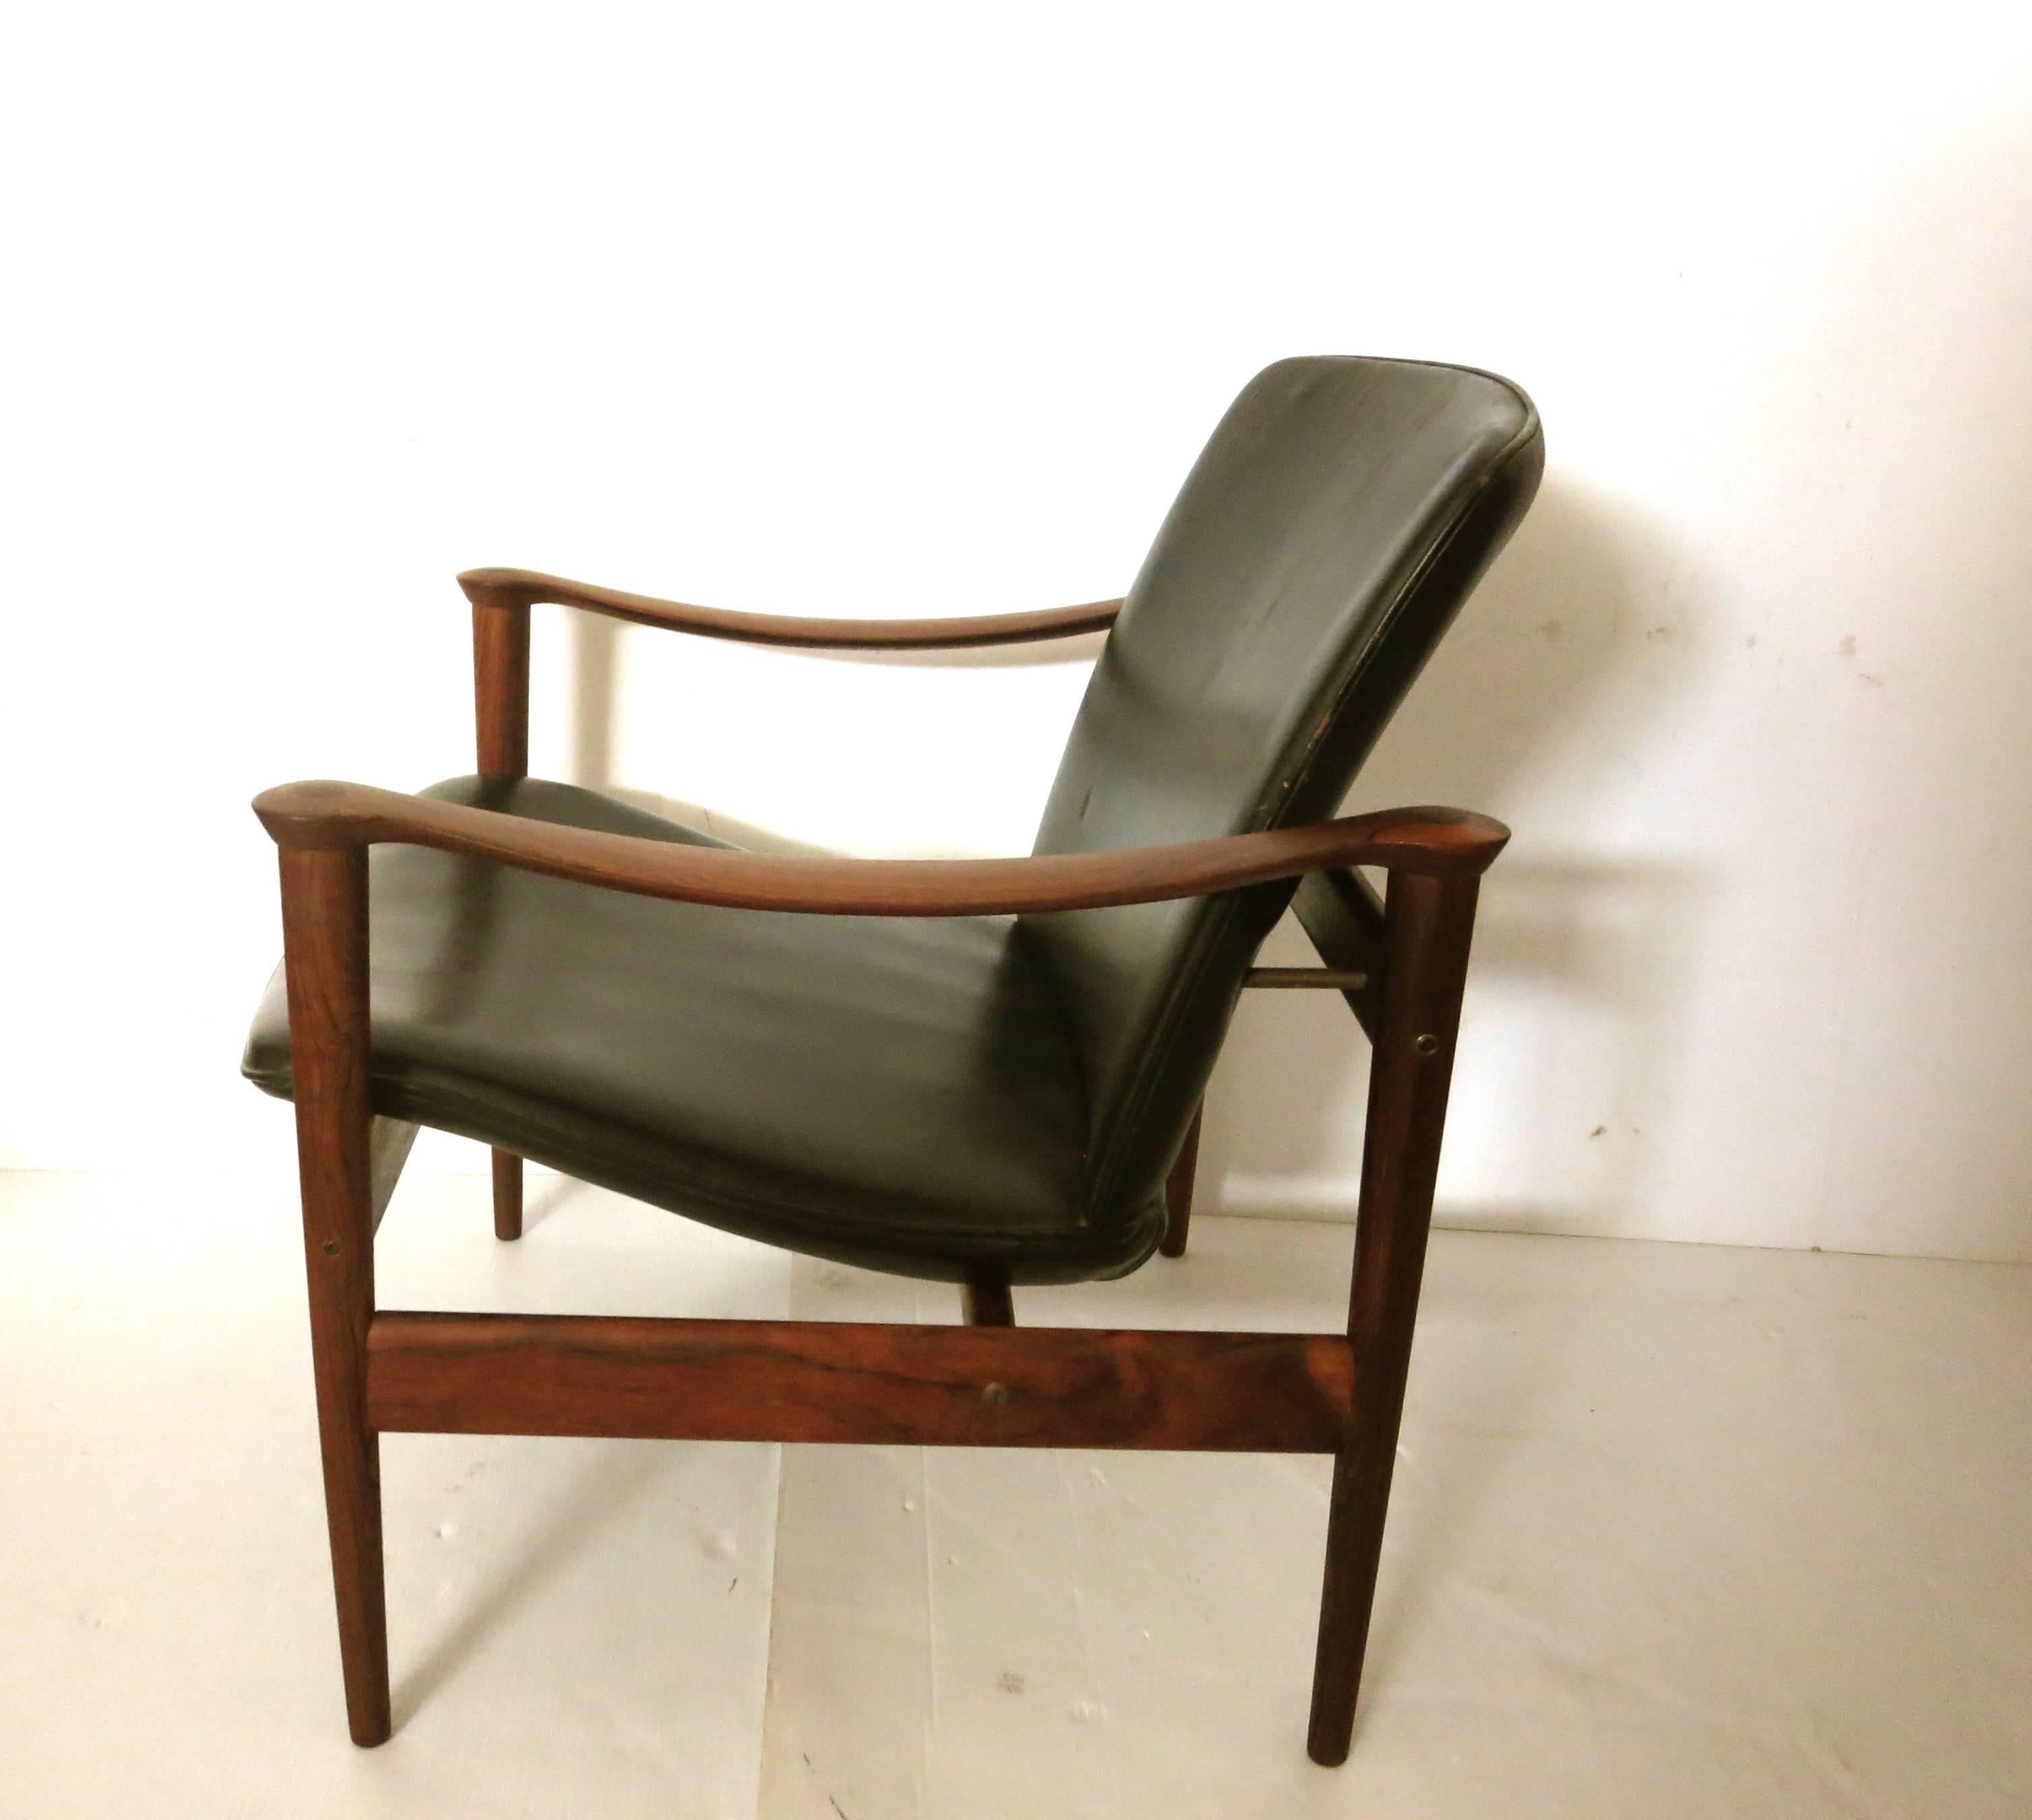 Elegant and unique pair of black leather and rosewood armchairs, designed by Fredrik Kayser, made in Norway the chairs are in great original condition, sculpted armrest, solid and sturdy, loveseat its also available, these chairs are hard to find